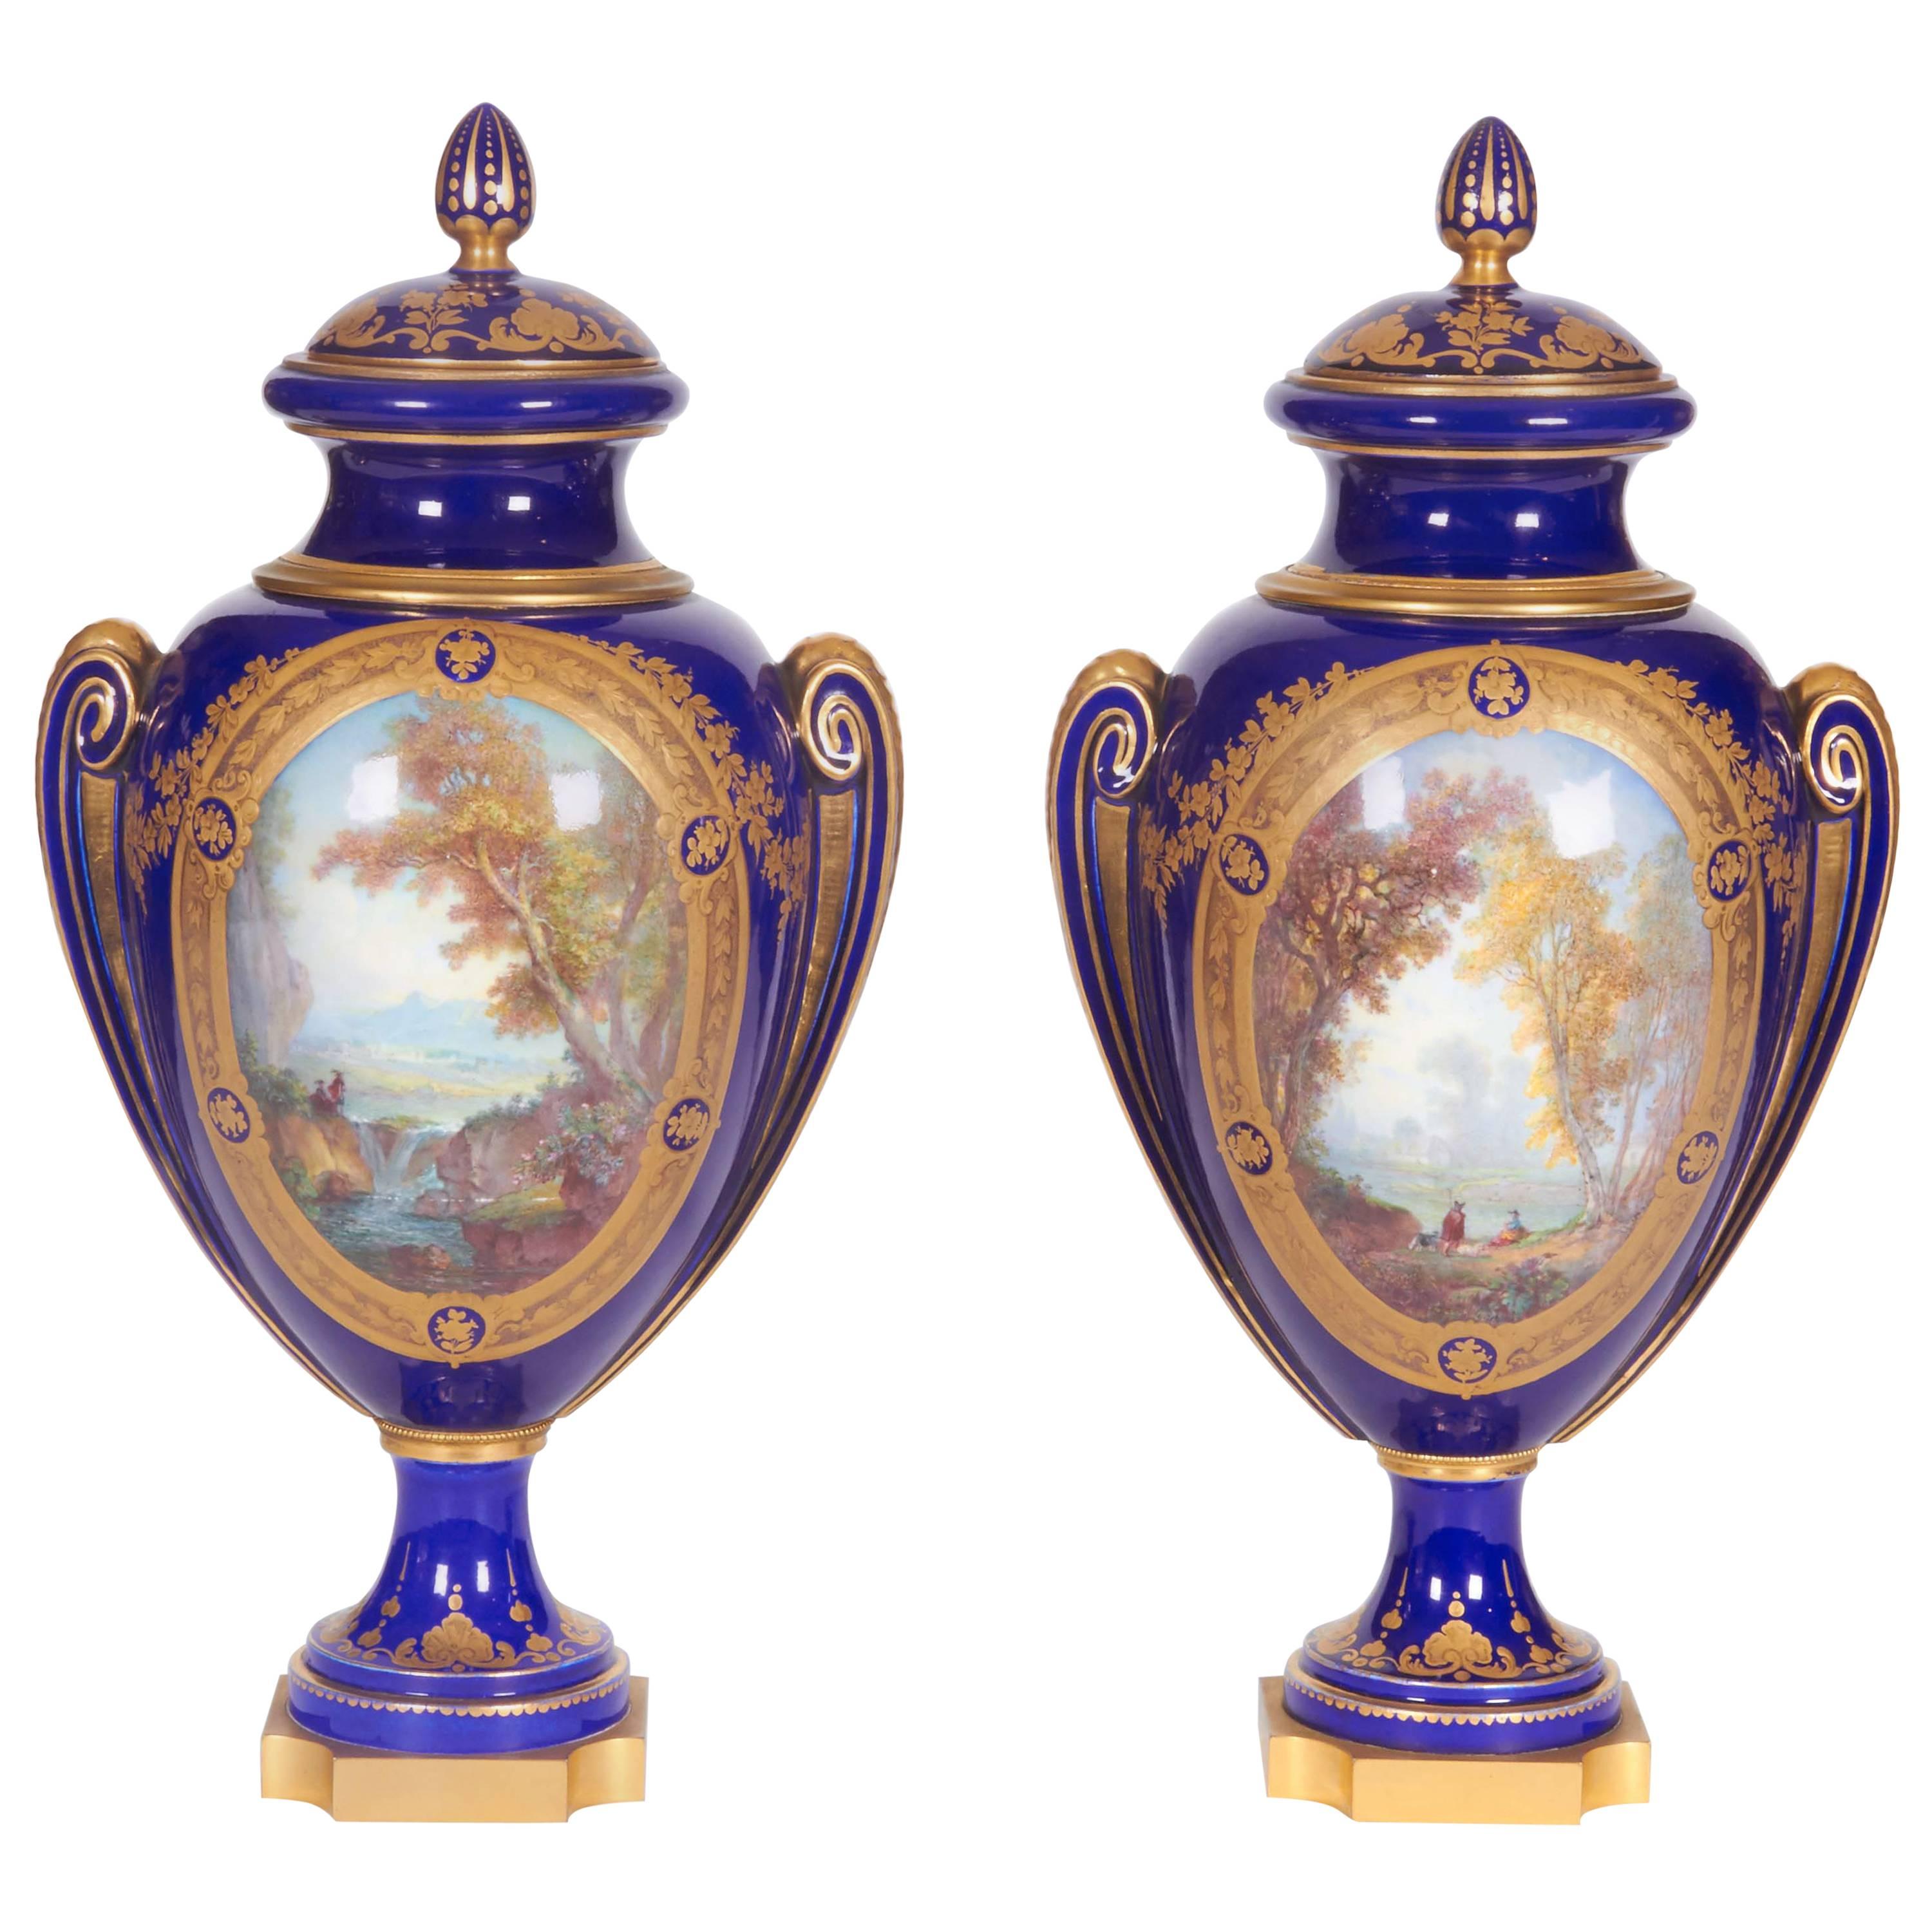 Pair of Napoleon III Sevres Porcelain Cobalt Blue Vases and Covers on Ormolu